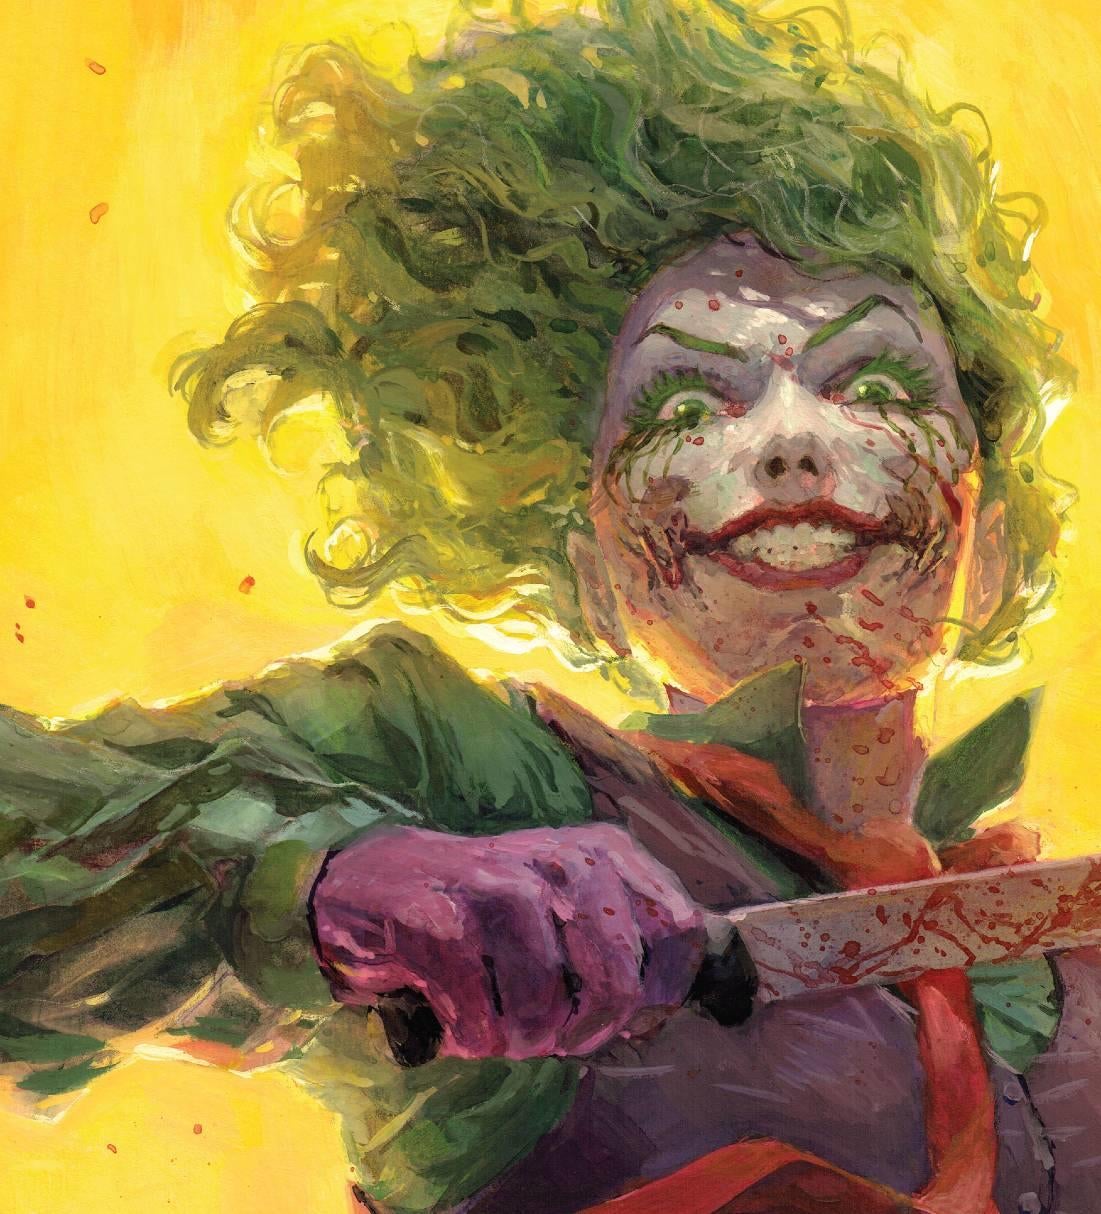 DC Finally Reveals The Joker's Real Name